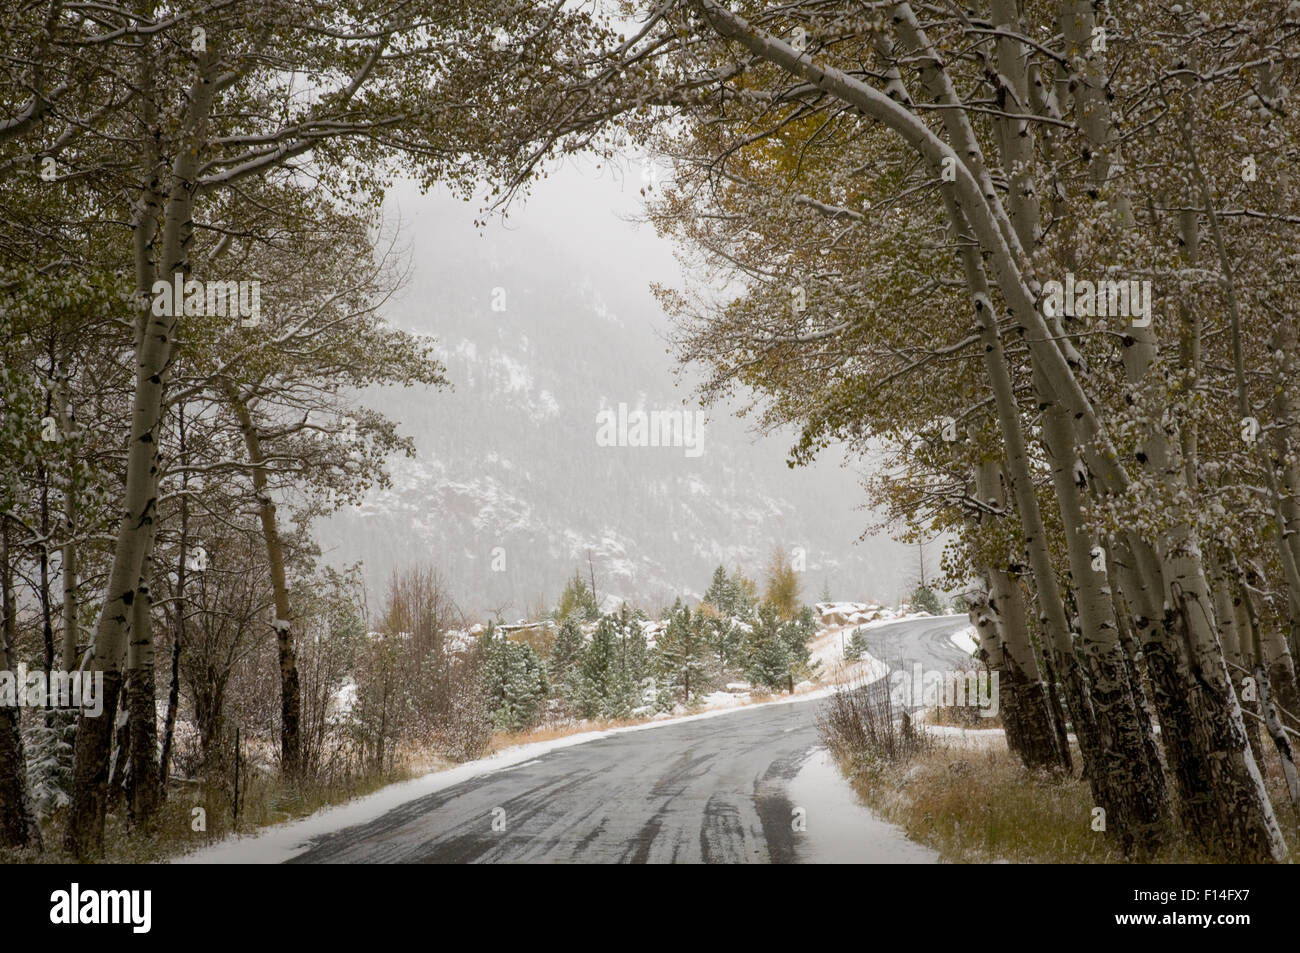 SNOW FALLING ON WET COUNTRY MOUNTAIN ROAD Stock Photo